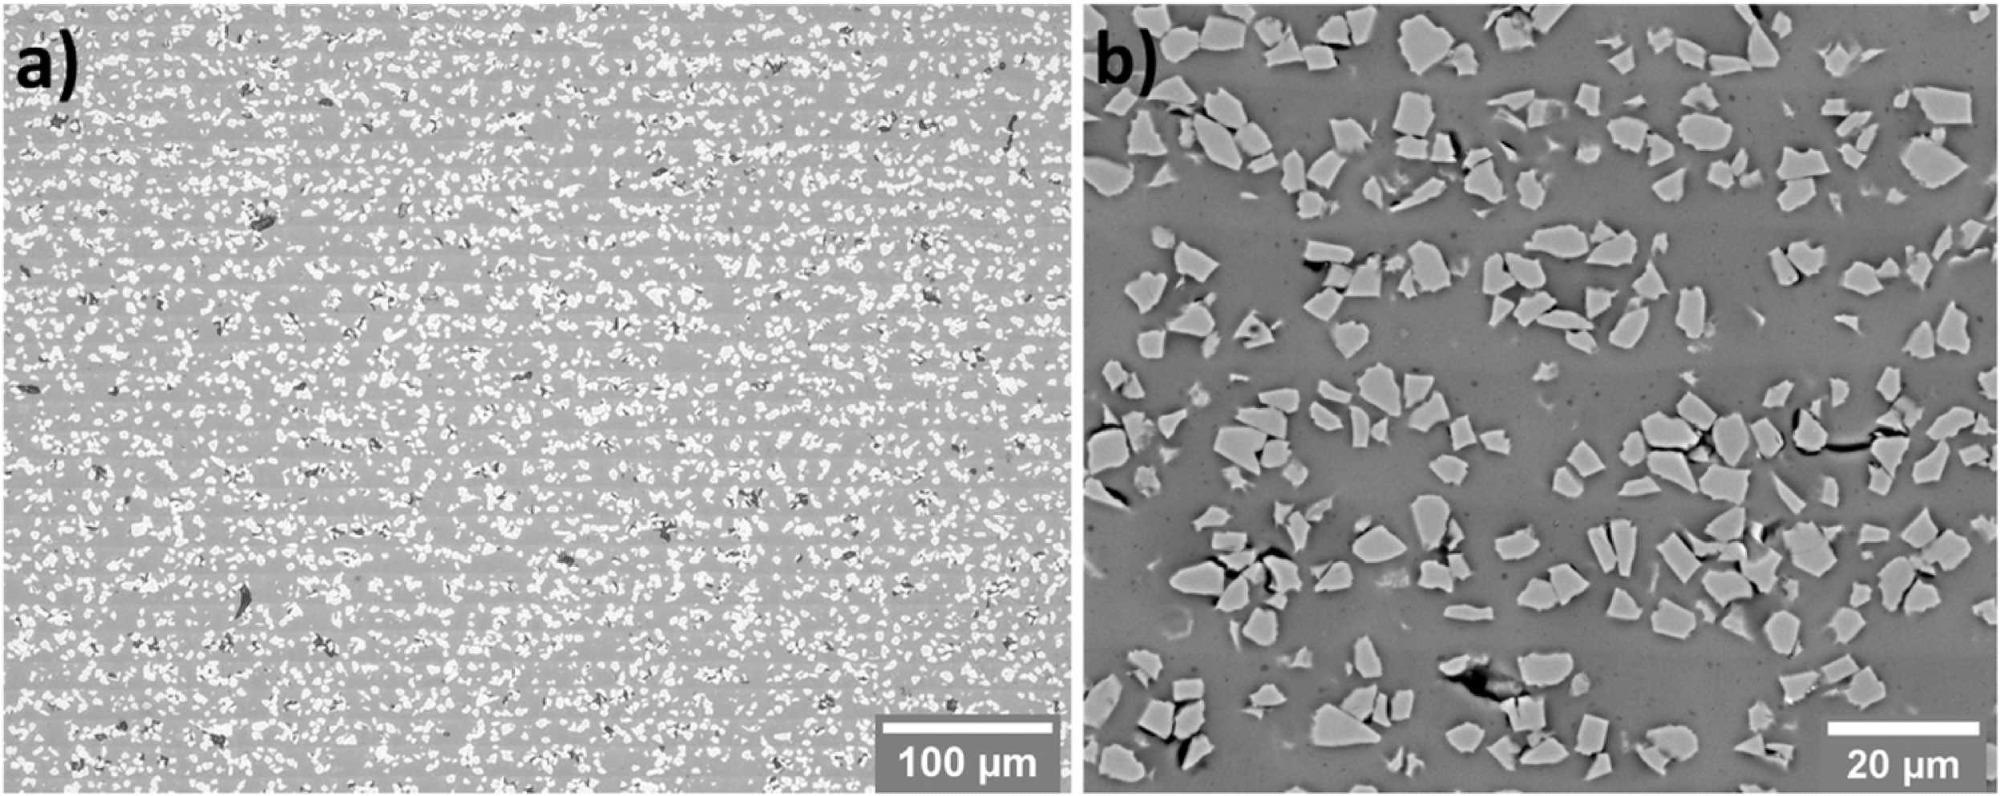 Ceramographic cross-sections of PSO/SiC composites: (a) light microscopy image; (b) backscattered electron microscopy image